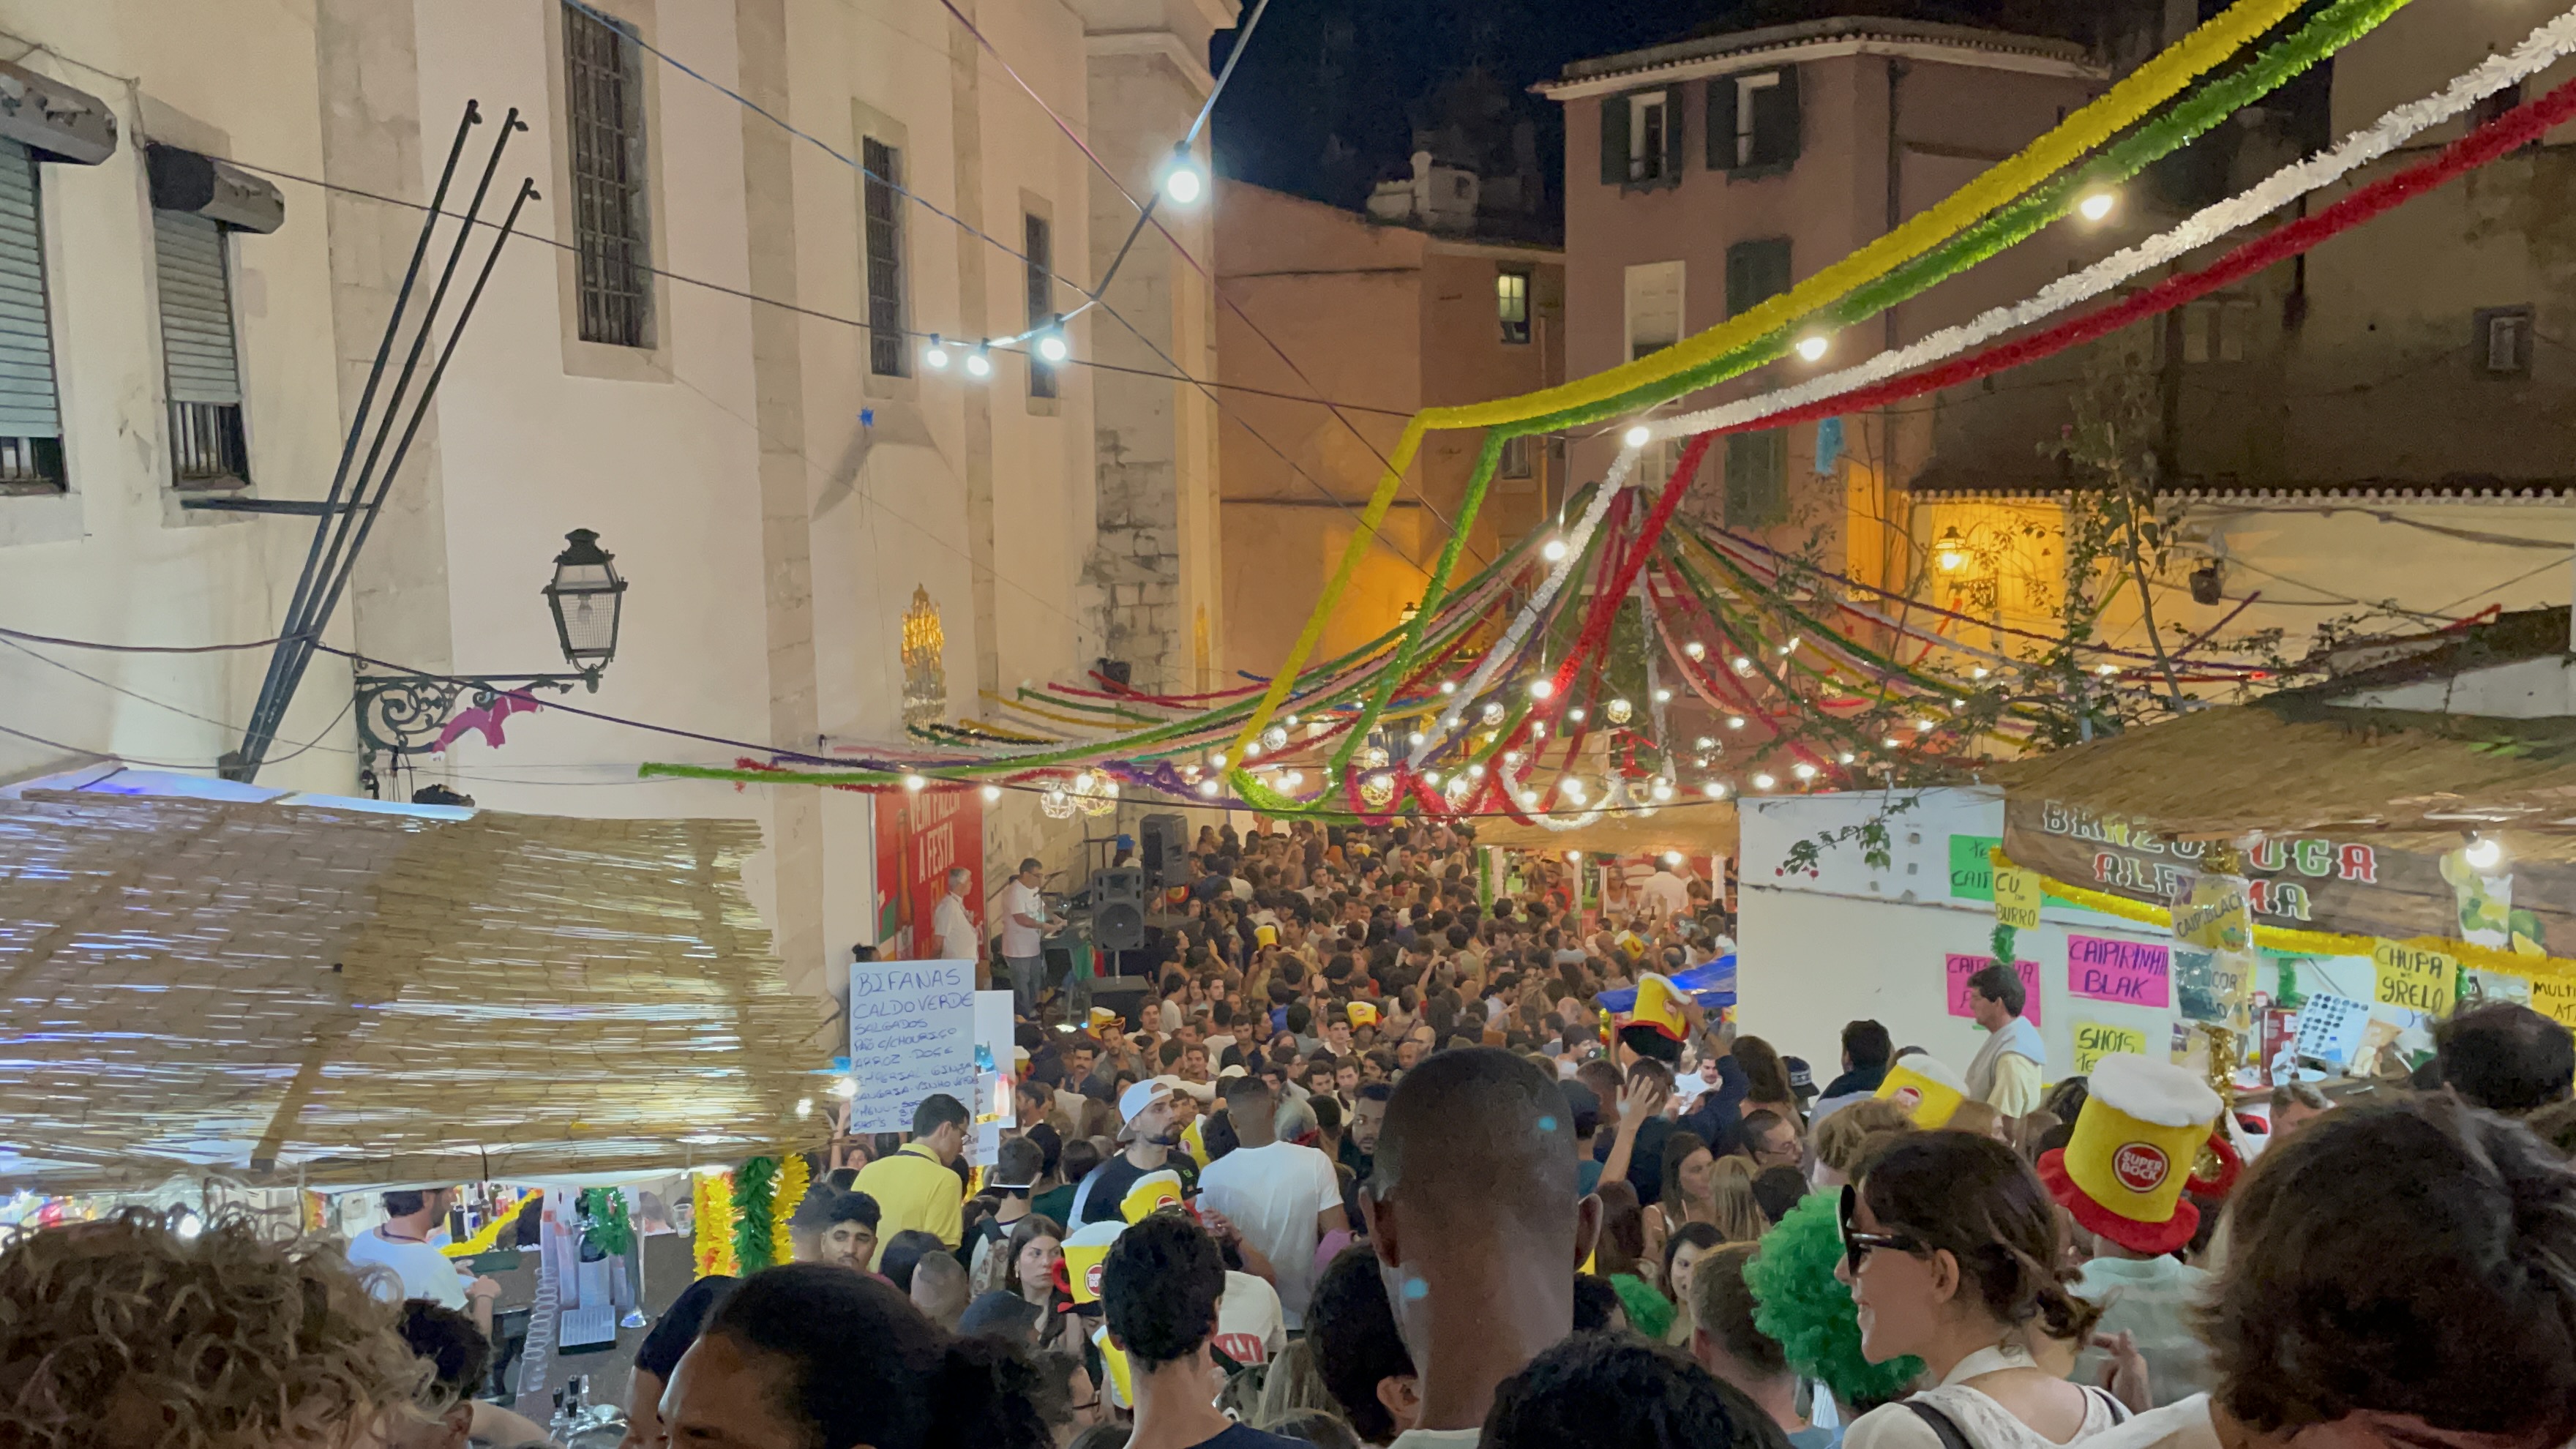 Nearly every street in Alfama was just as packed and festive.